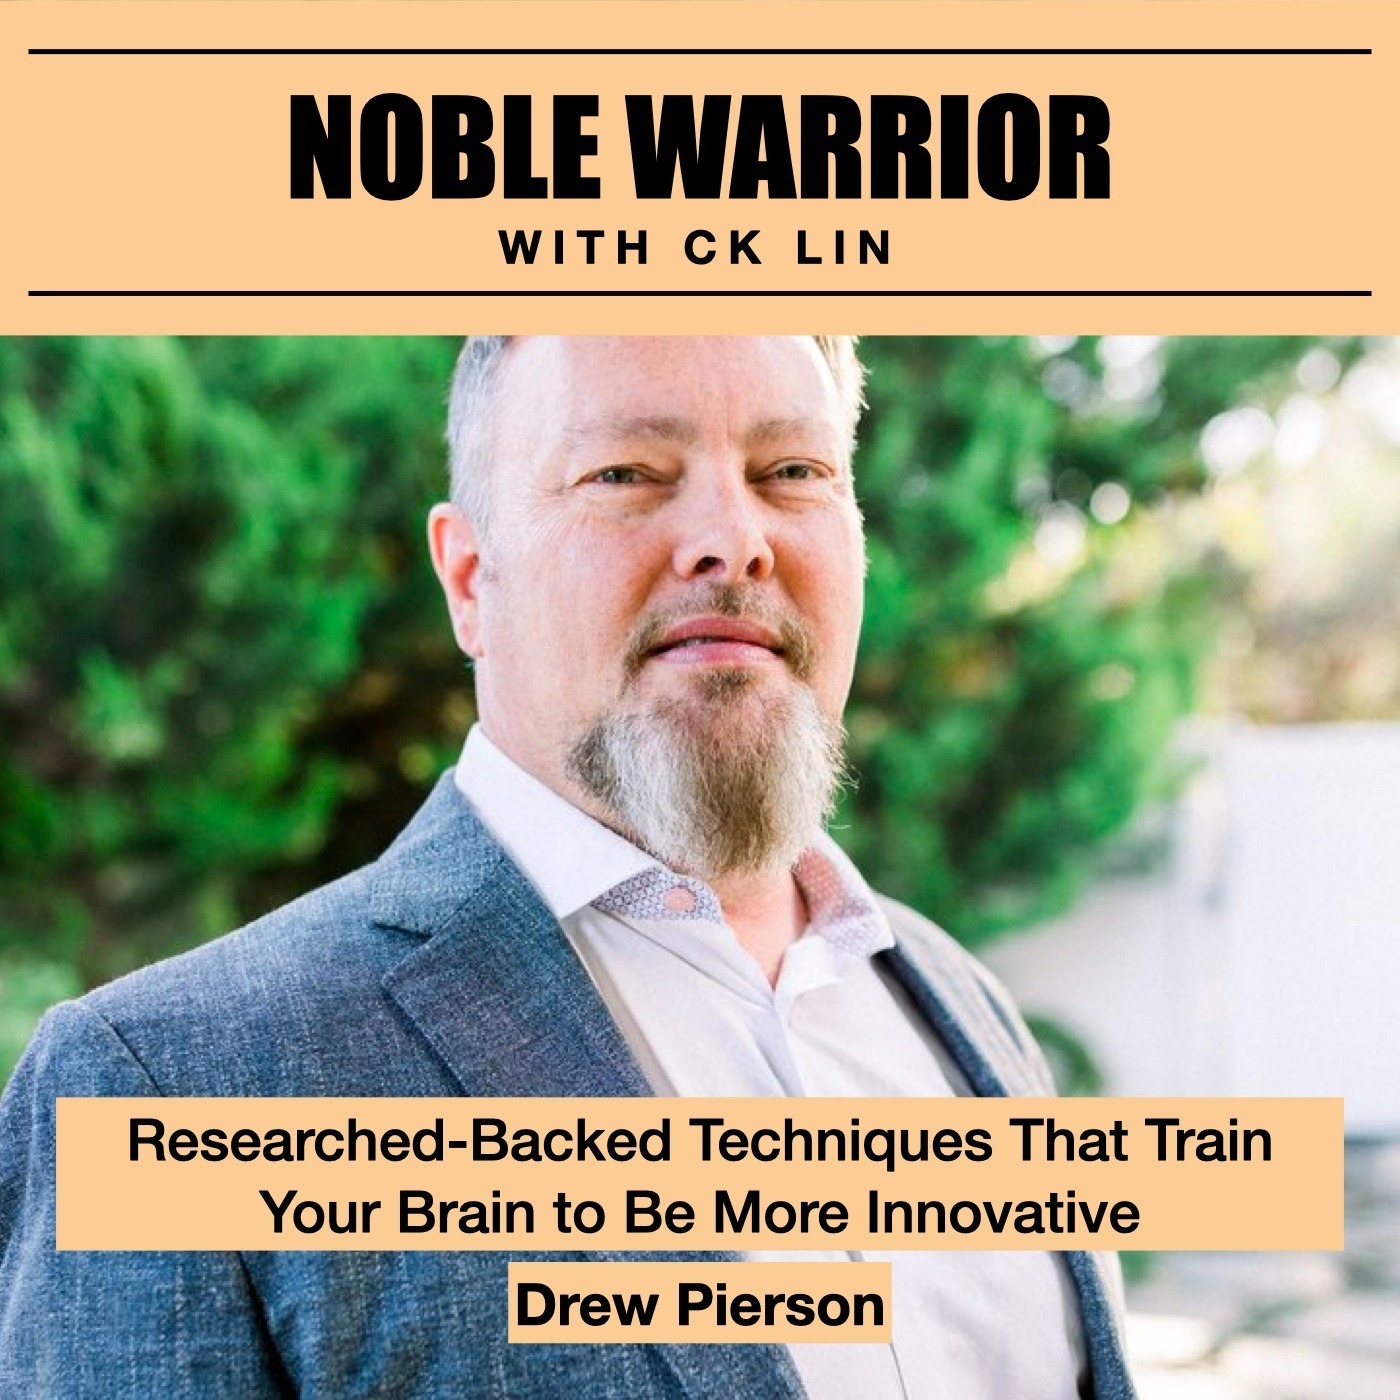 134 Drew Pierson: Researched-Backed Techniques That Train Your Brain to Be More Innovative Image